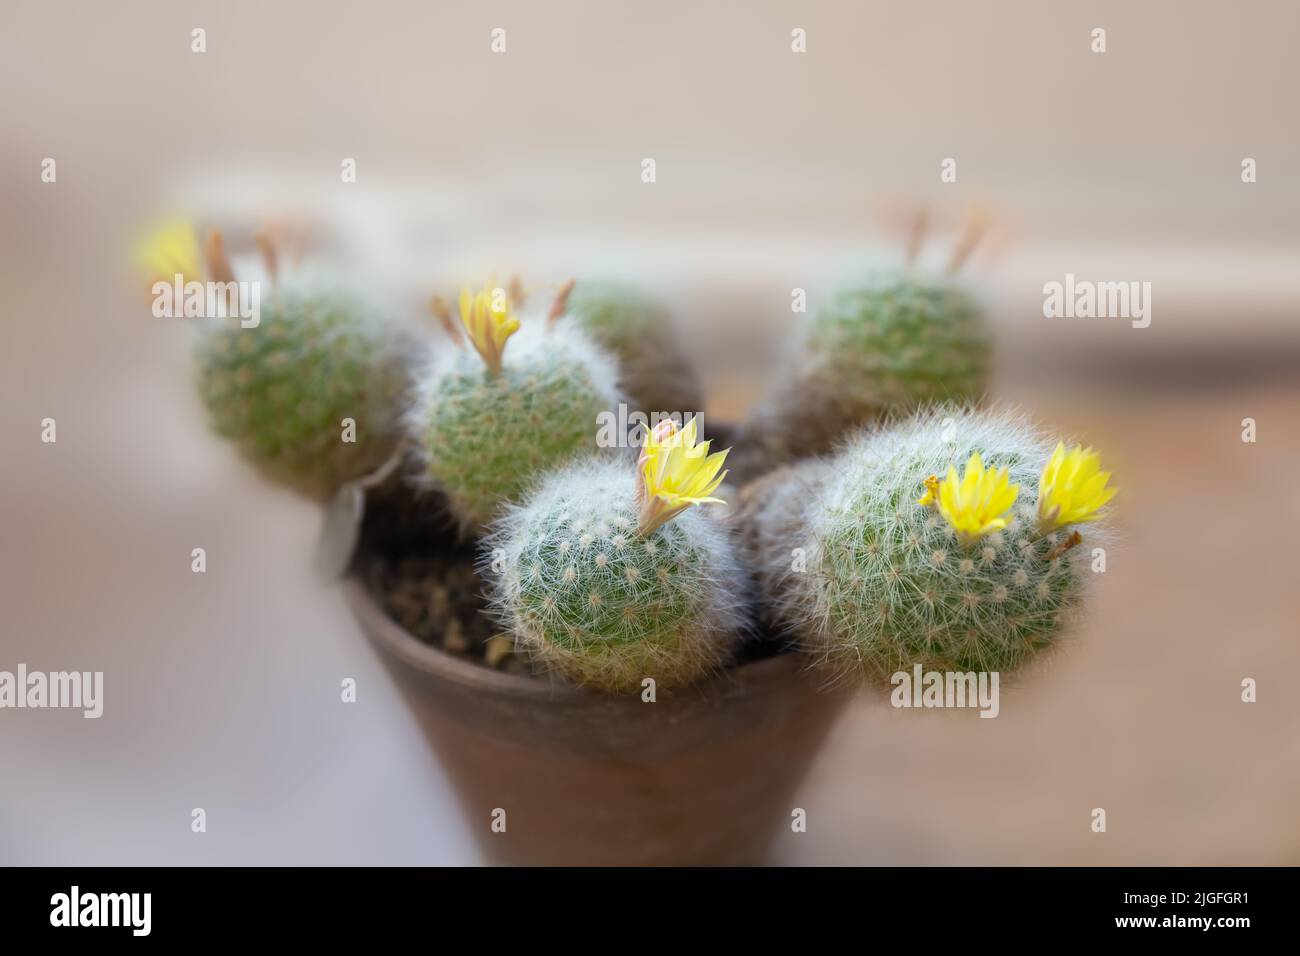 Mammillaria baumii cactus with yellow flowers in a flower pot Stock Photo